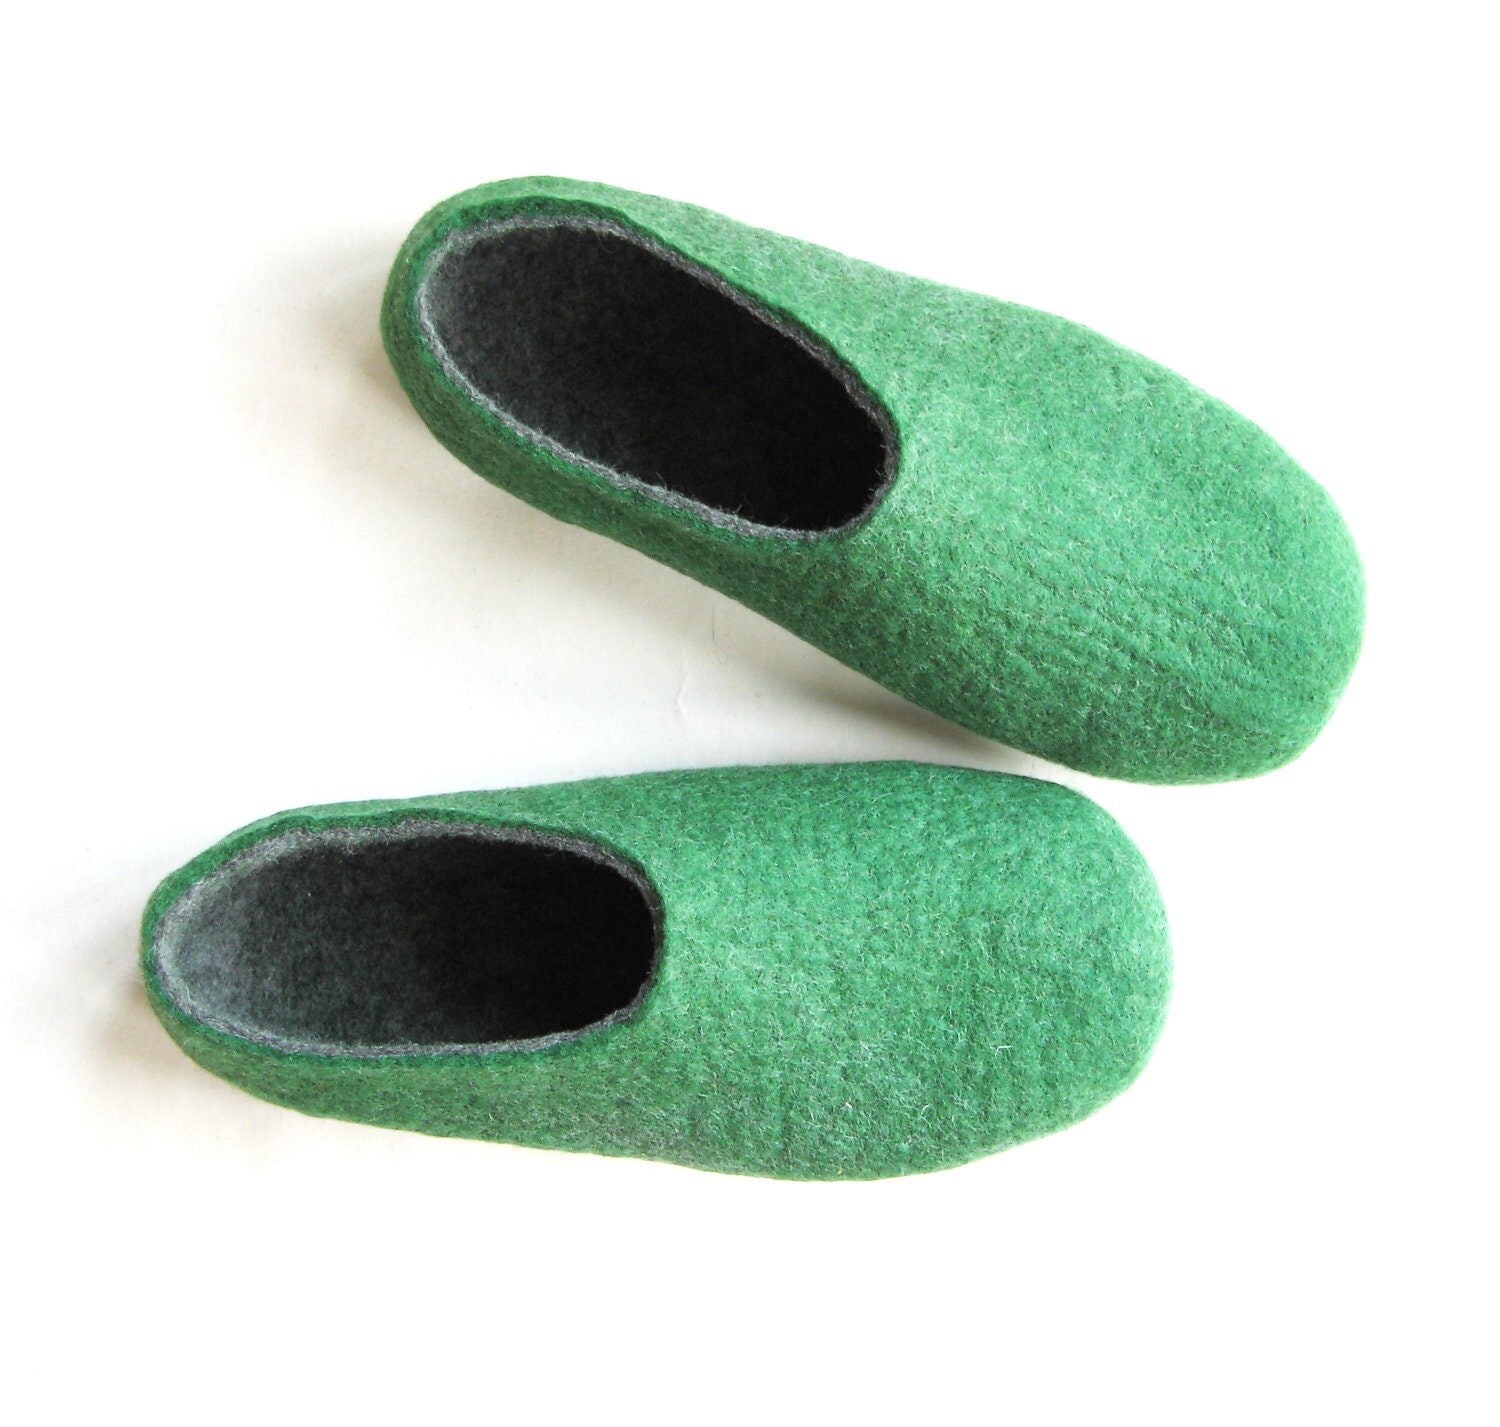 Mens Springtime Eco friendly Felted Wool Slippers Apple Woods. All sizes for Men. - ekohaus